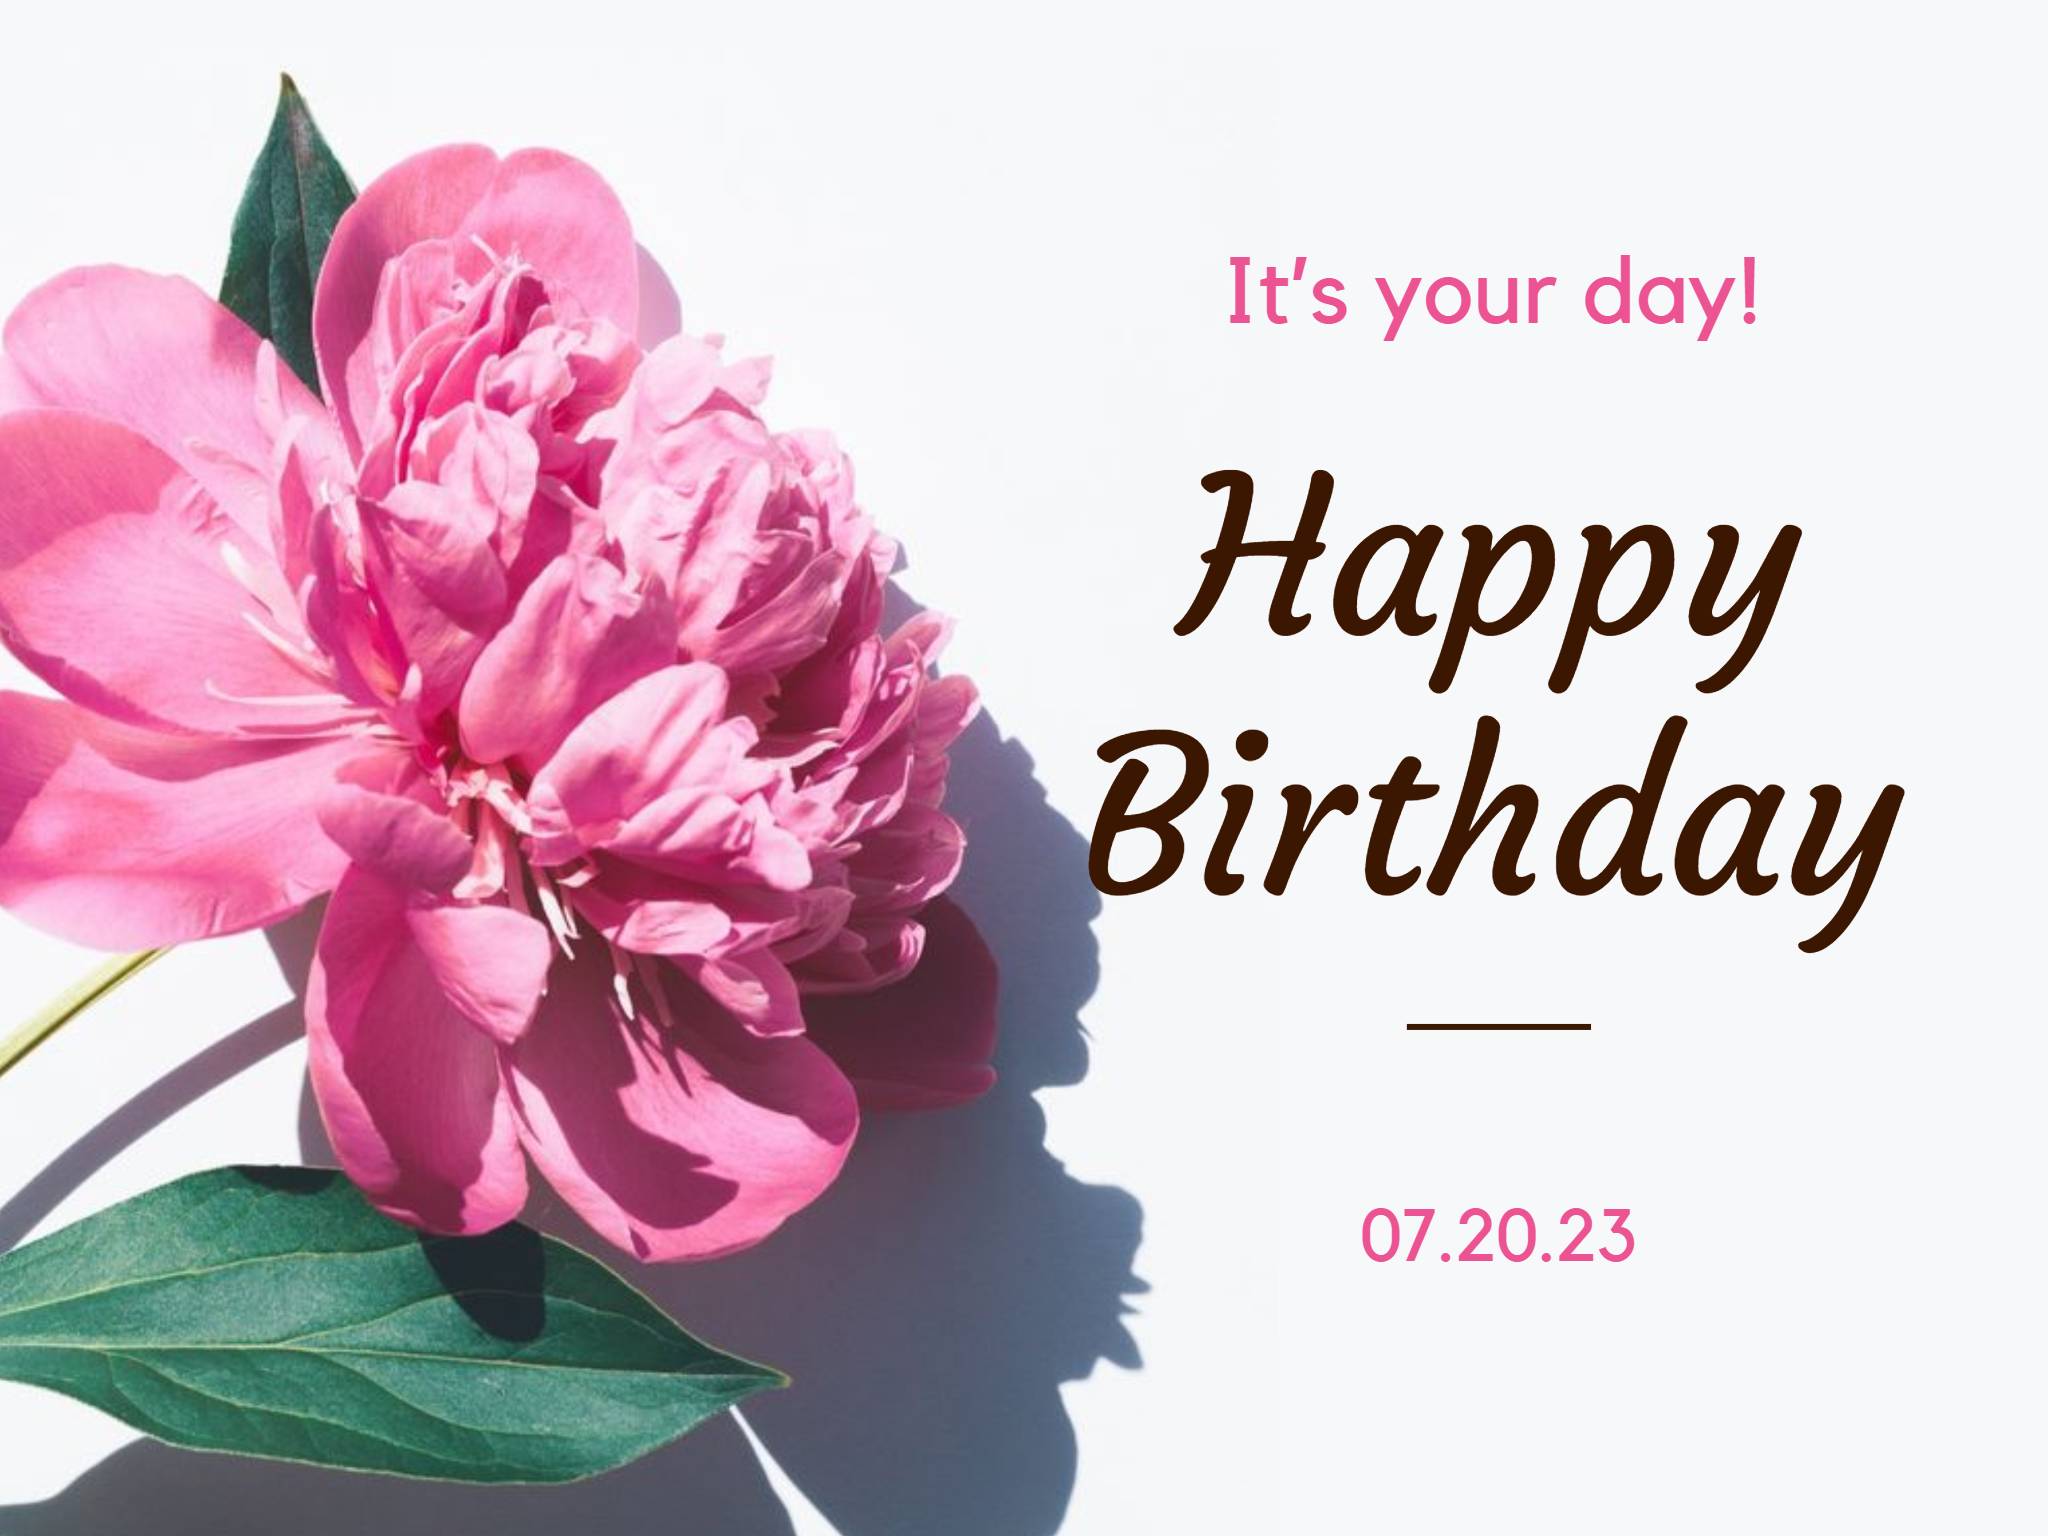 https://imgv3.fotor.com/images/blog-richtext-image/Simple-Floral-Happy-Birthday-Card.jpg